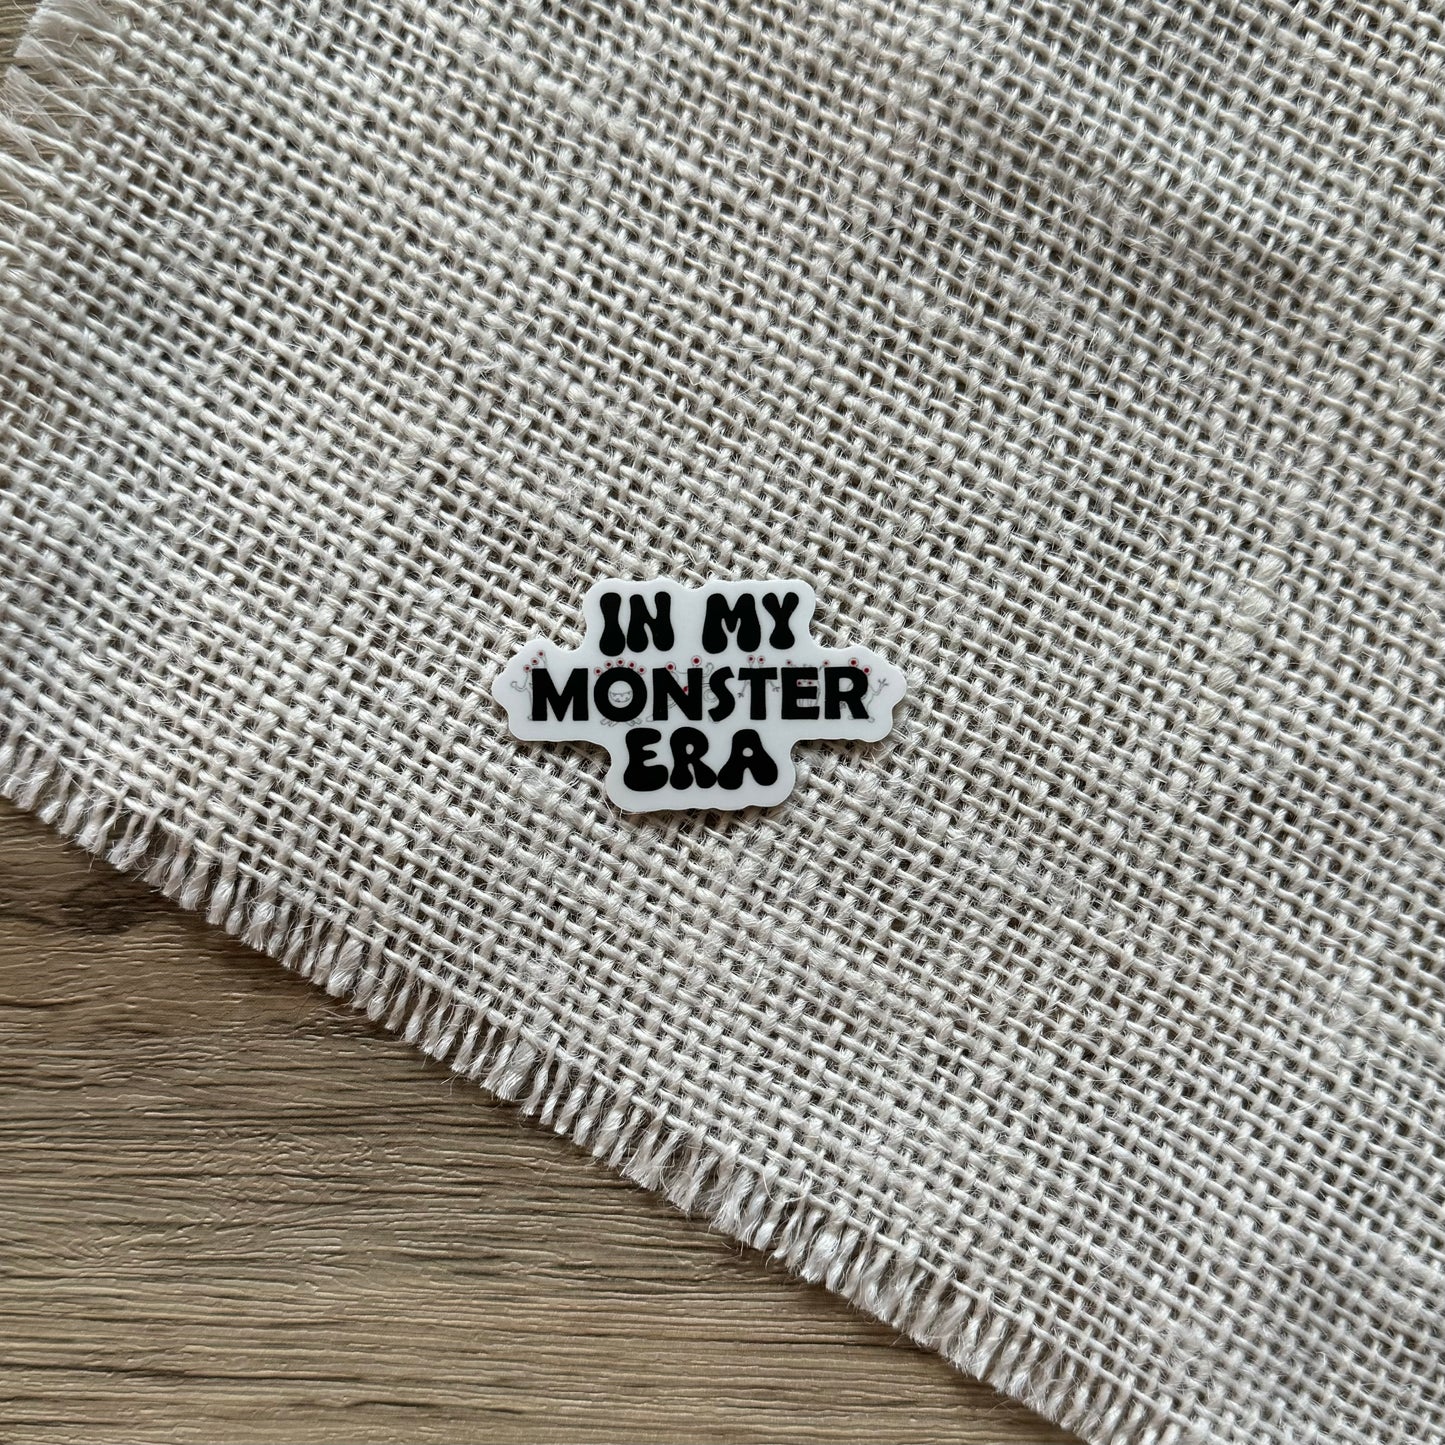 Monster Era| In my reading monster smut era|bookish quote|book lovers around will love| smutty reader| waterproof vinyl sticker| perfect for kindle, water bottle, laptop, iPad & more!